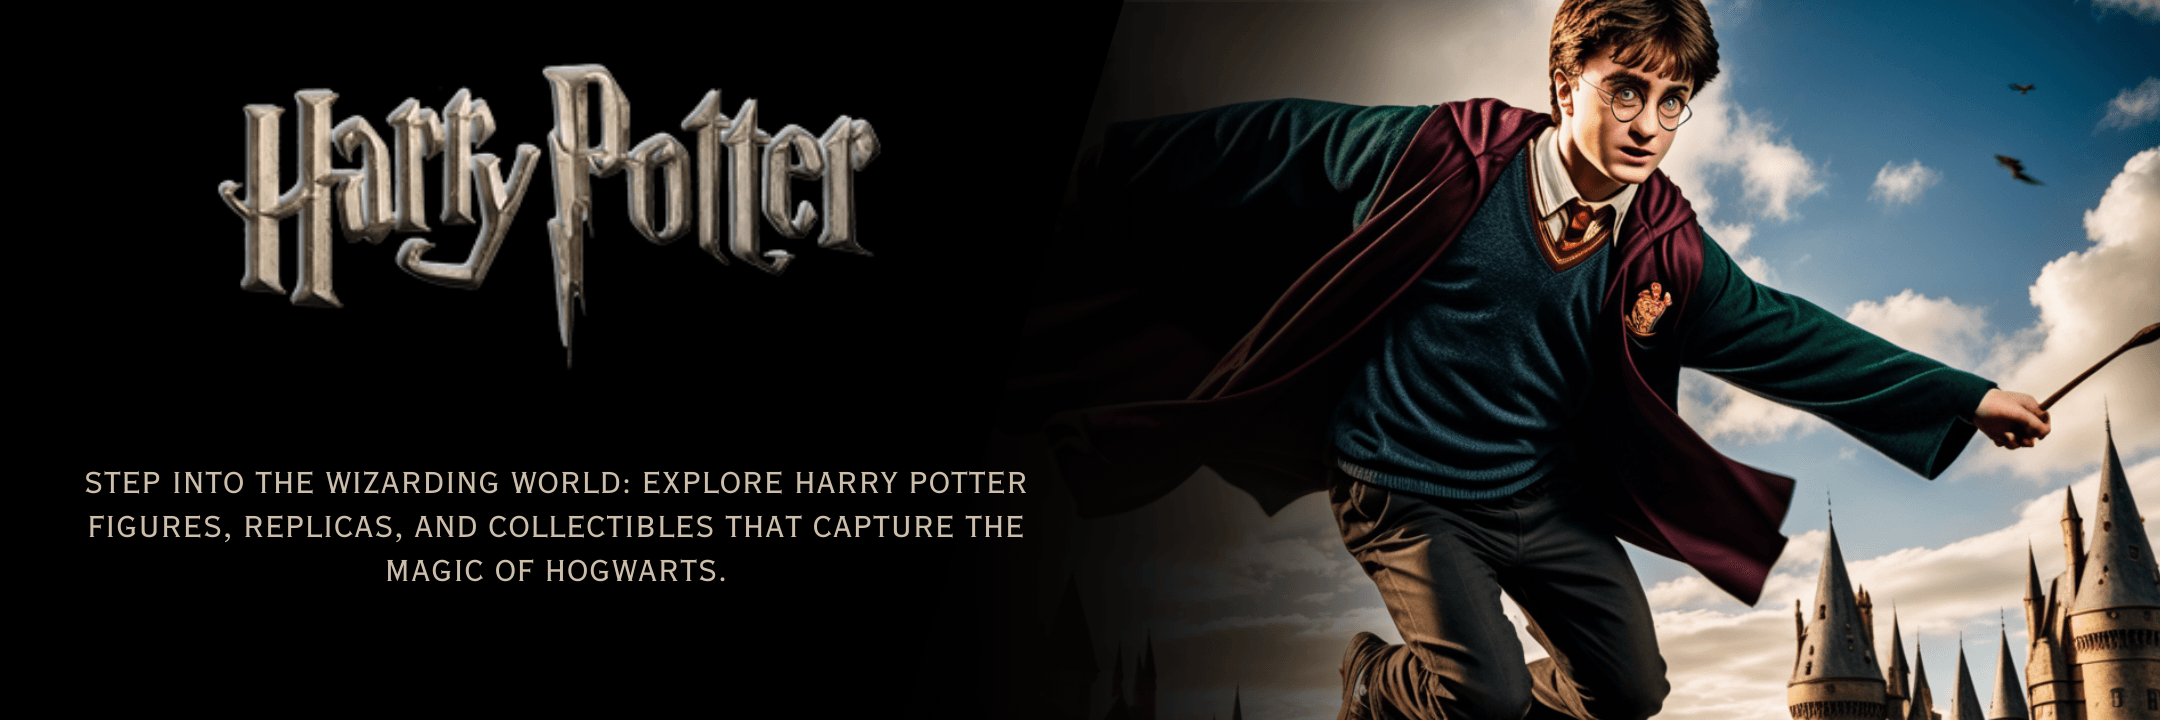 Discover_harry_potter_Figures_Replicas_and_Collectibles - Ginga Toys